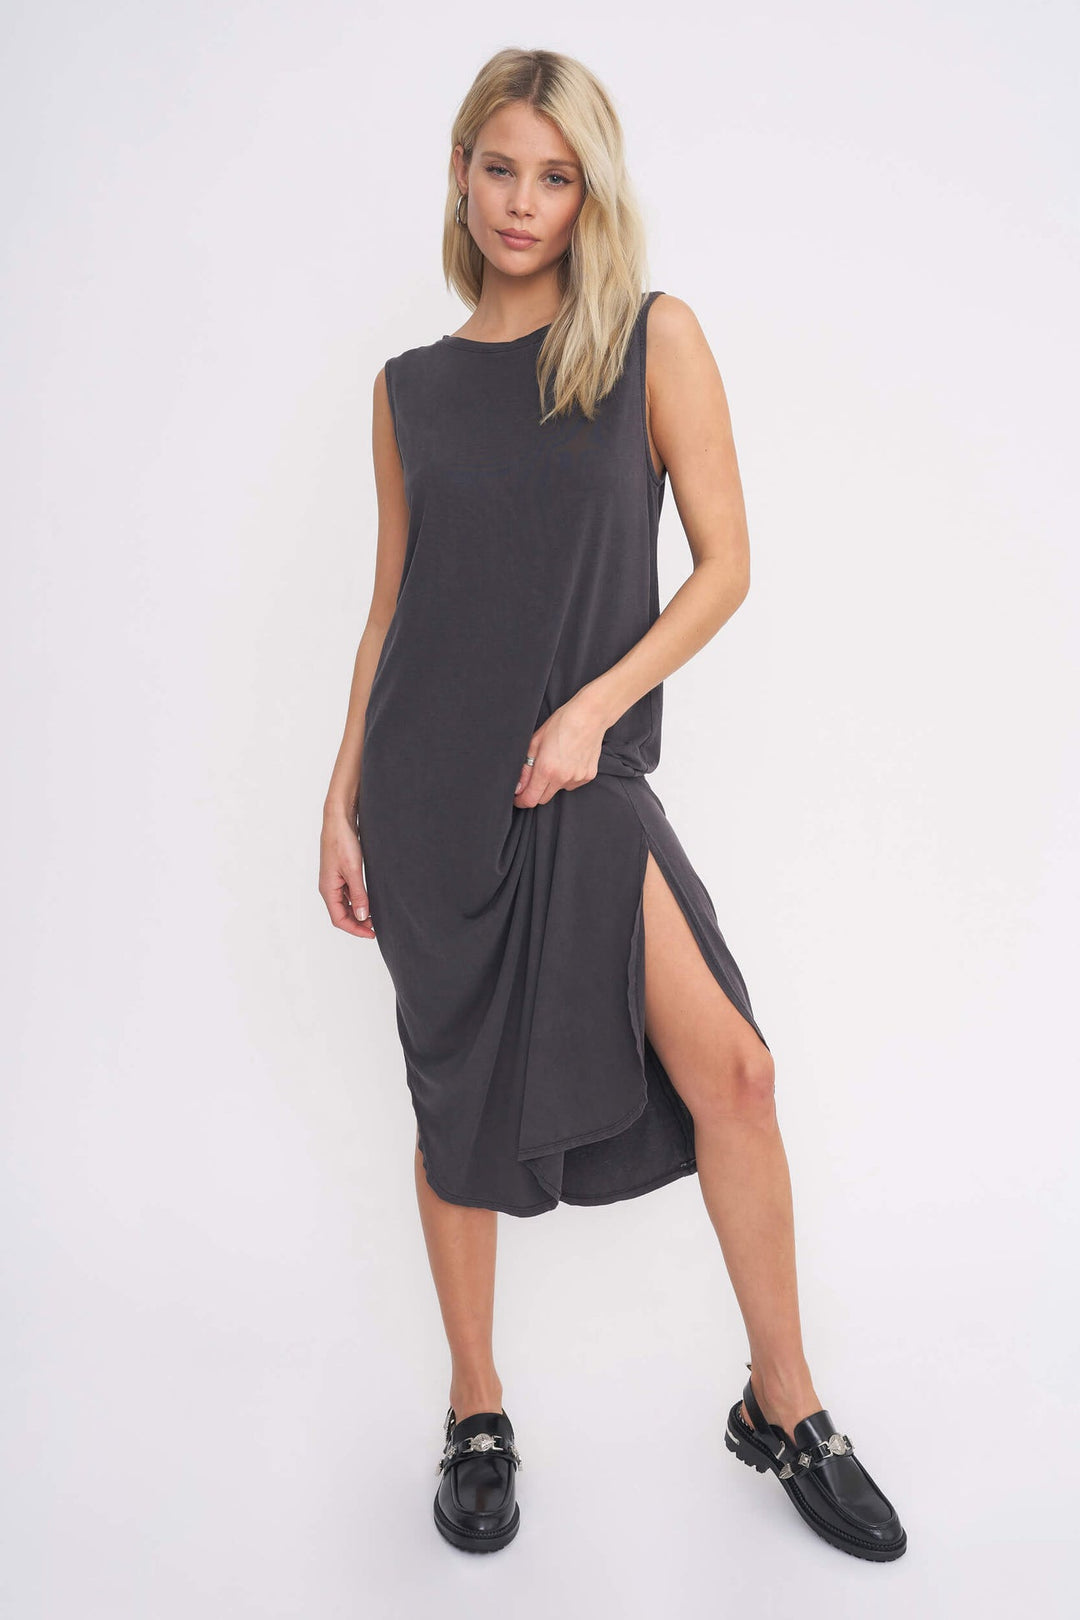 BLACK SNAP OUT OF IT TANK DRESS - Kingfisher Road - Online Boutique